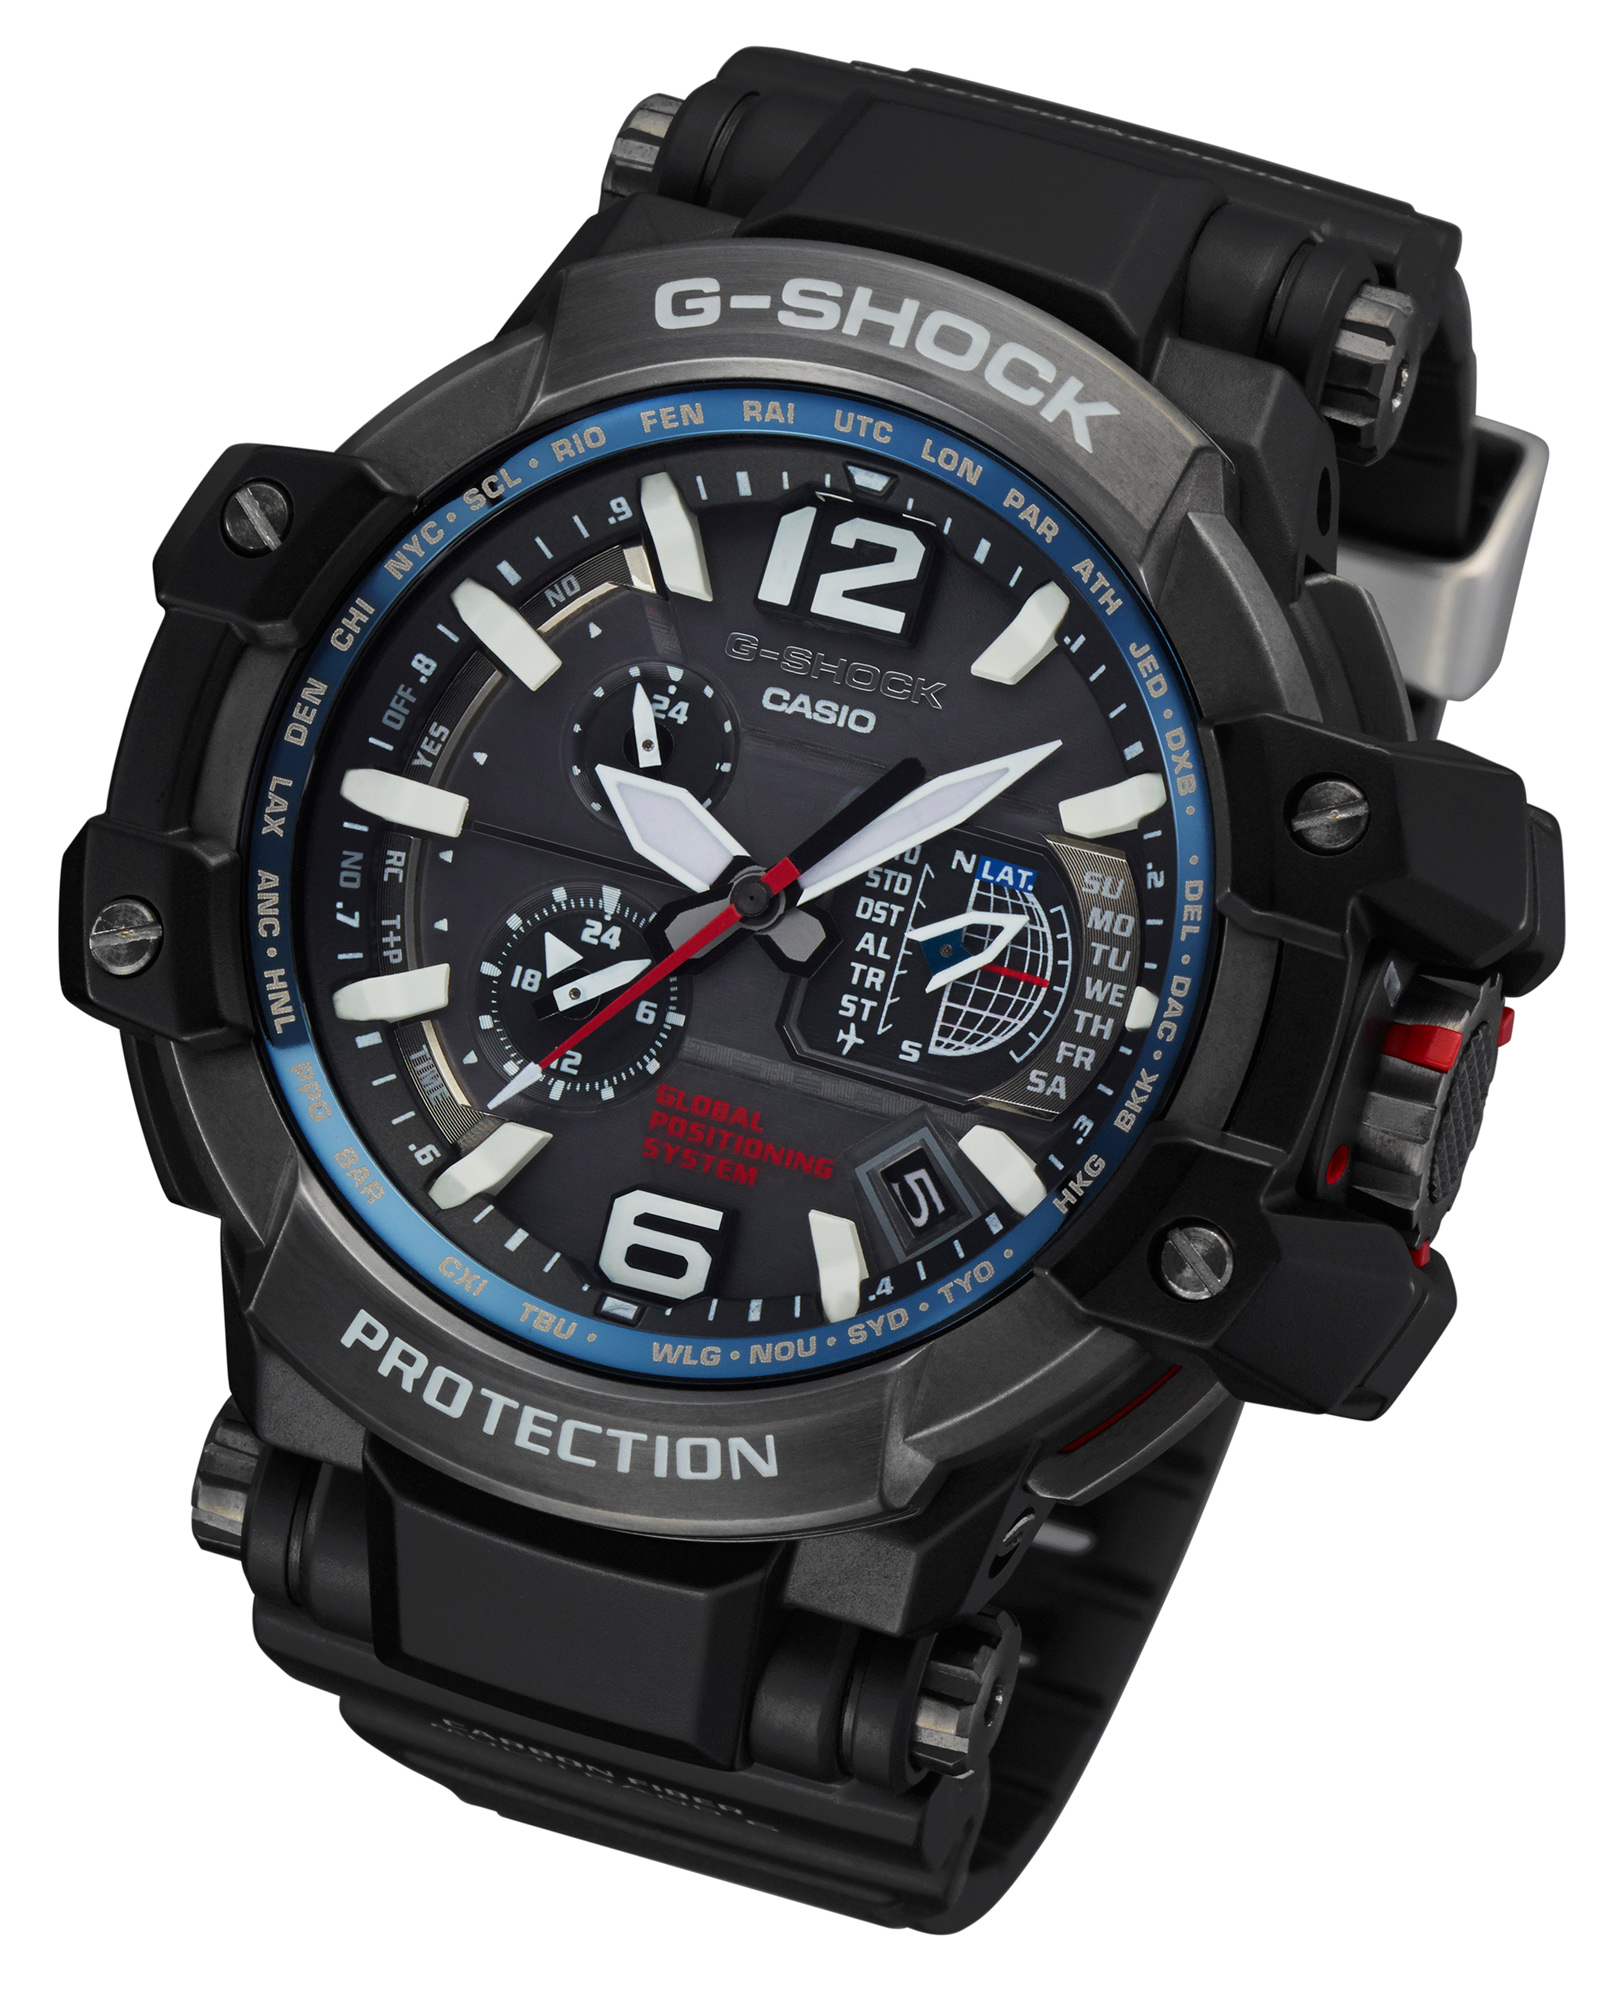 Casio Unveiled The First GPS Timepiece-G-shock GPS - Swiss AP Watches Blog